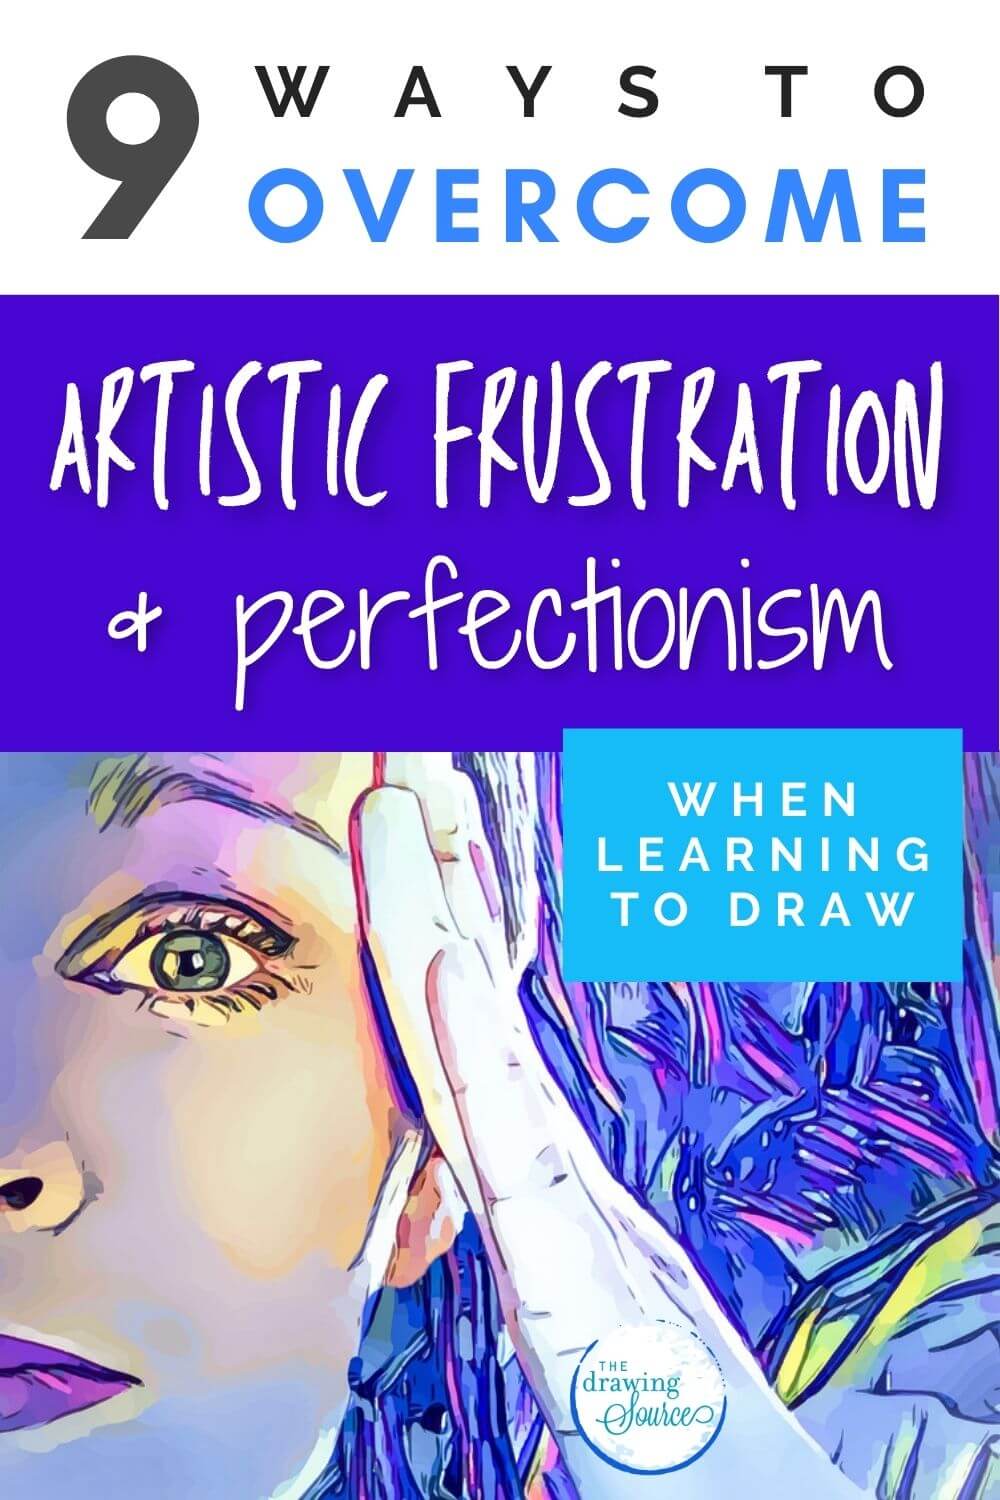 A colorful, stylized illustration of a concerned woman with text: 9 ways to overcome artistic frustration and perfectionism when learning to draw